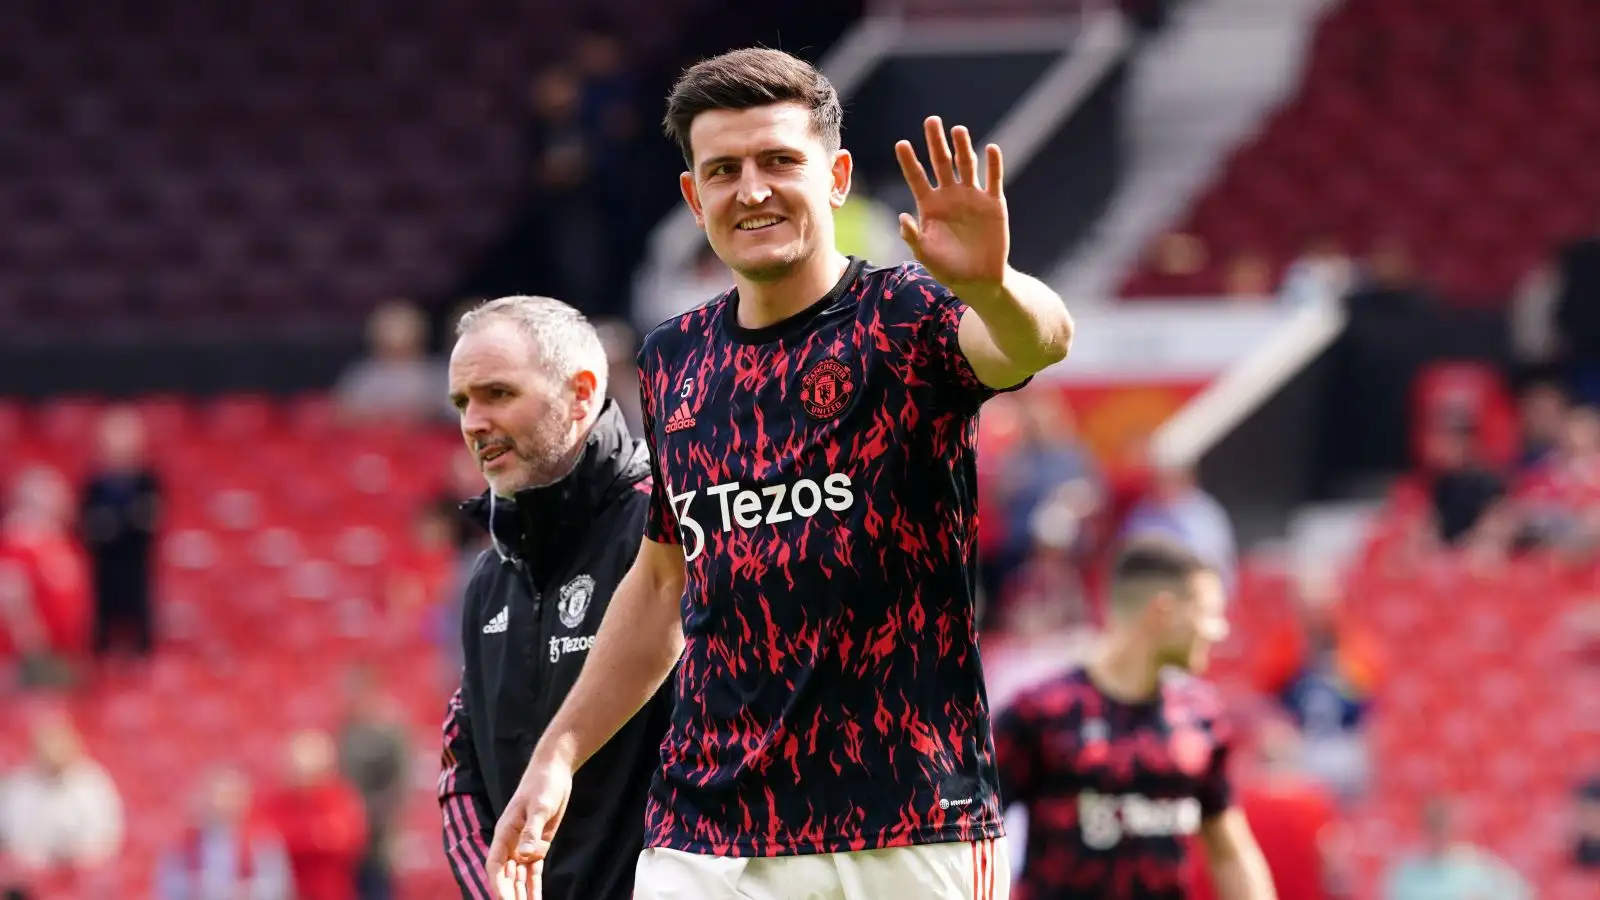 Man Utd captain Harry Maguire waves to someone in the crowd